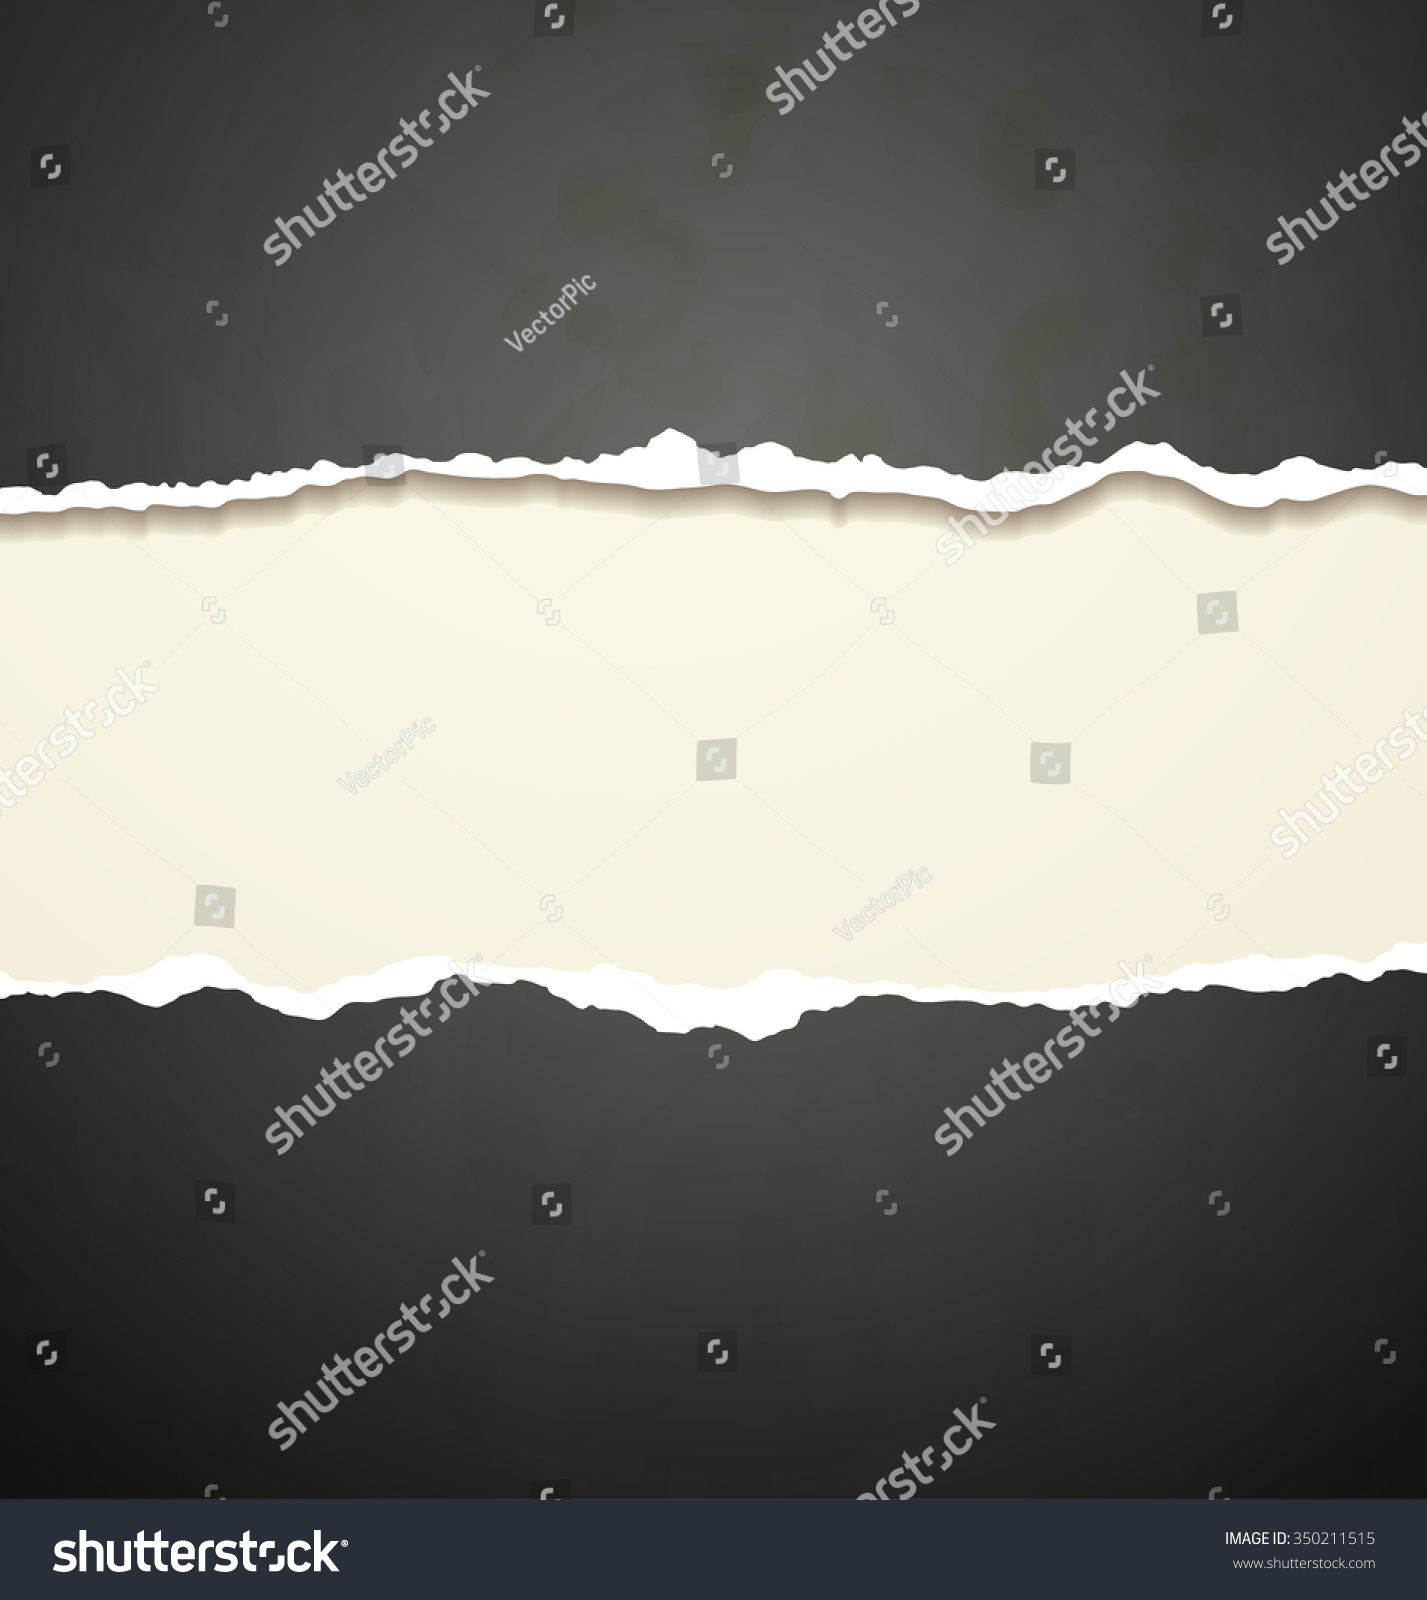 Tear paper on abstract  background #350211515